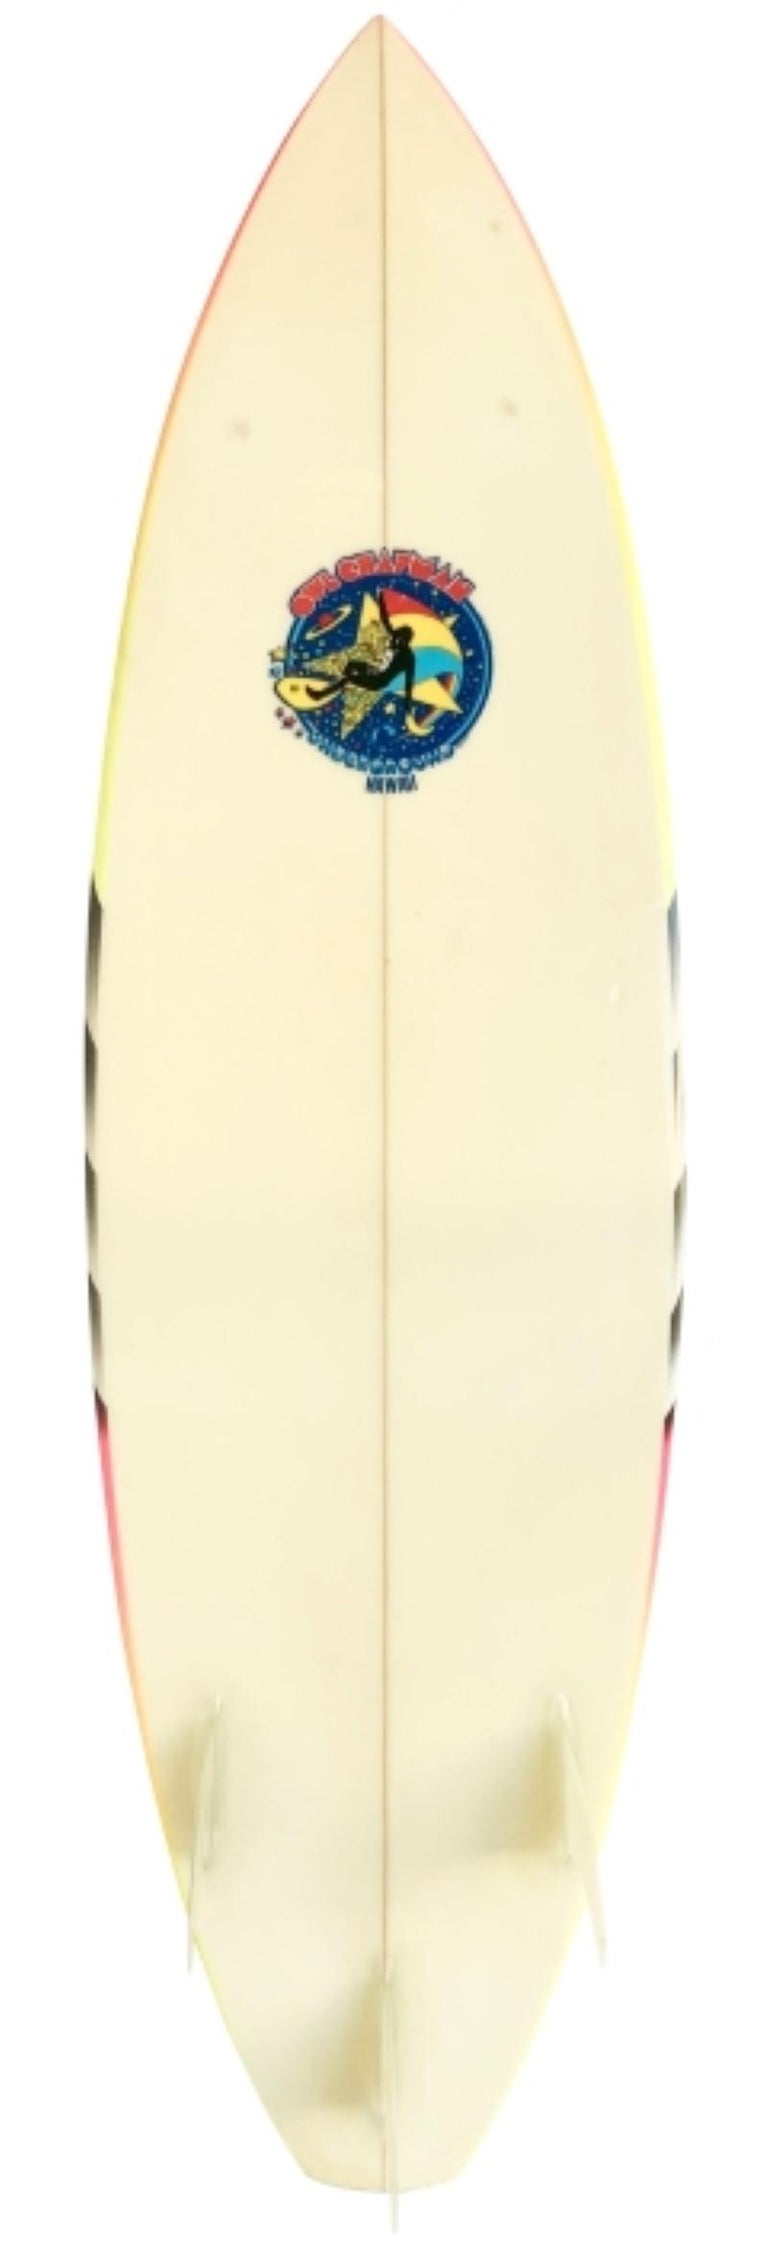 Mid-1980s Owl Chapman underground Hawaii thruster(tri-fin) surfboard. Features a colorful airbrush design complimenting the original cosmic Owl Chapman underground surfboards logo. Shaped and signed by Owl Chapman. A great example of a 1980s